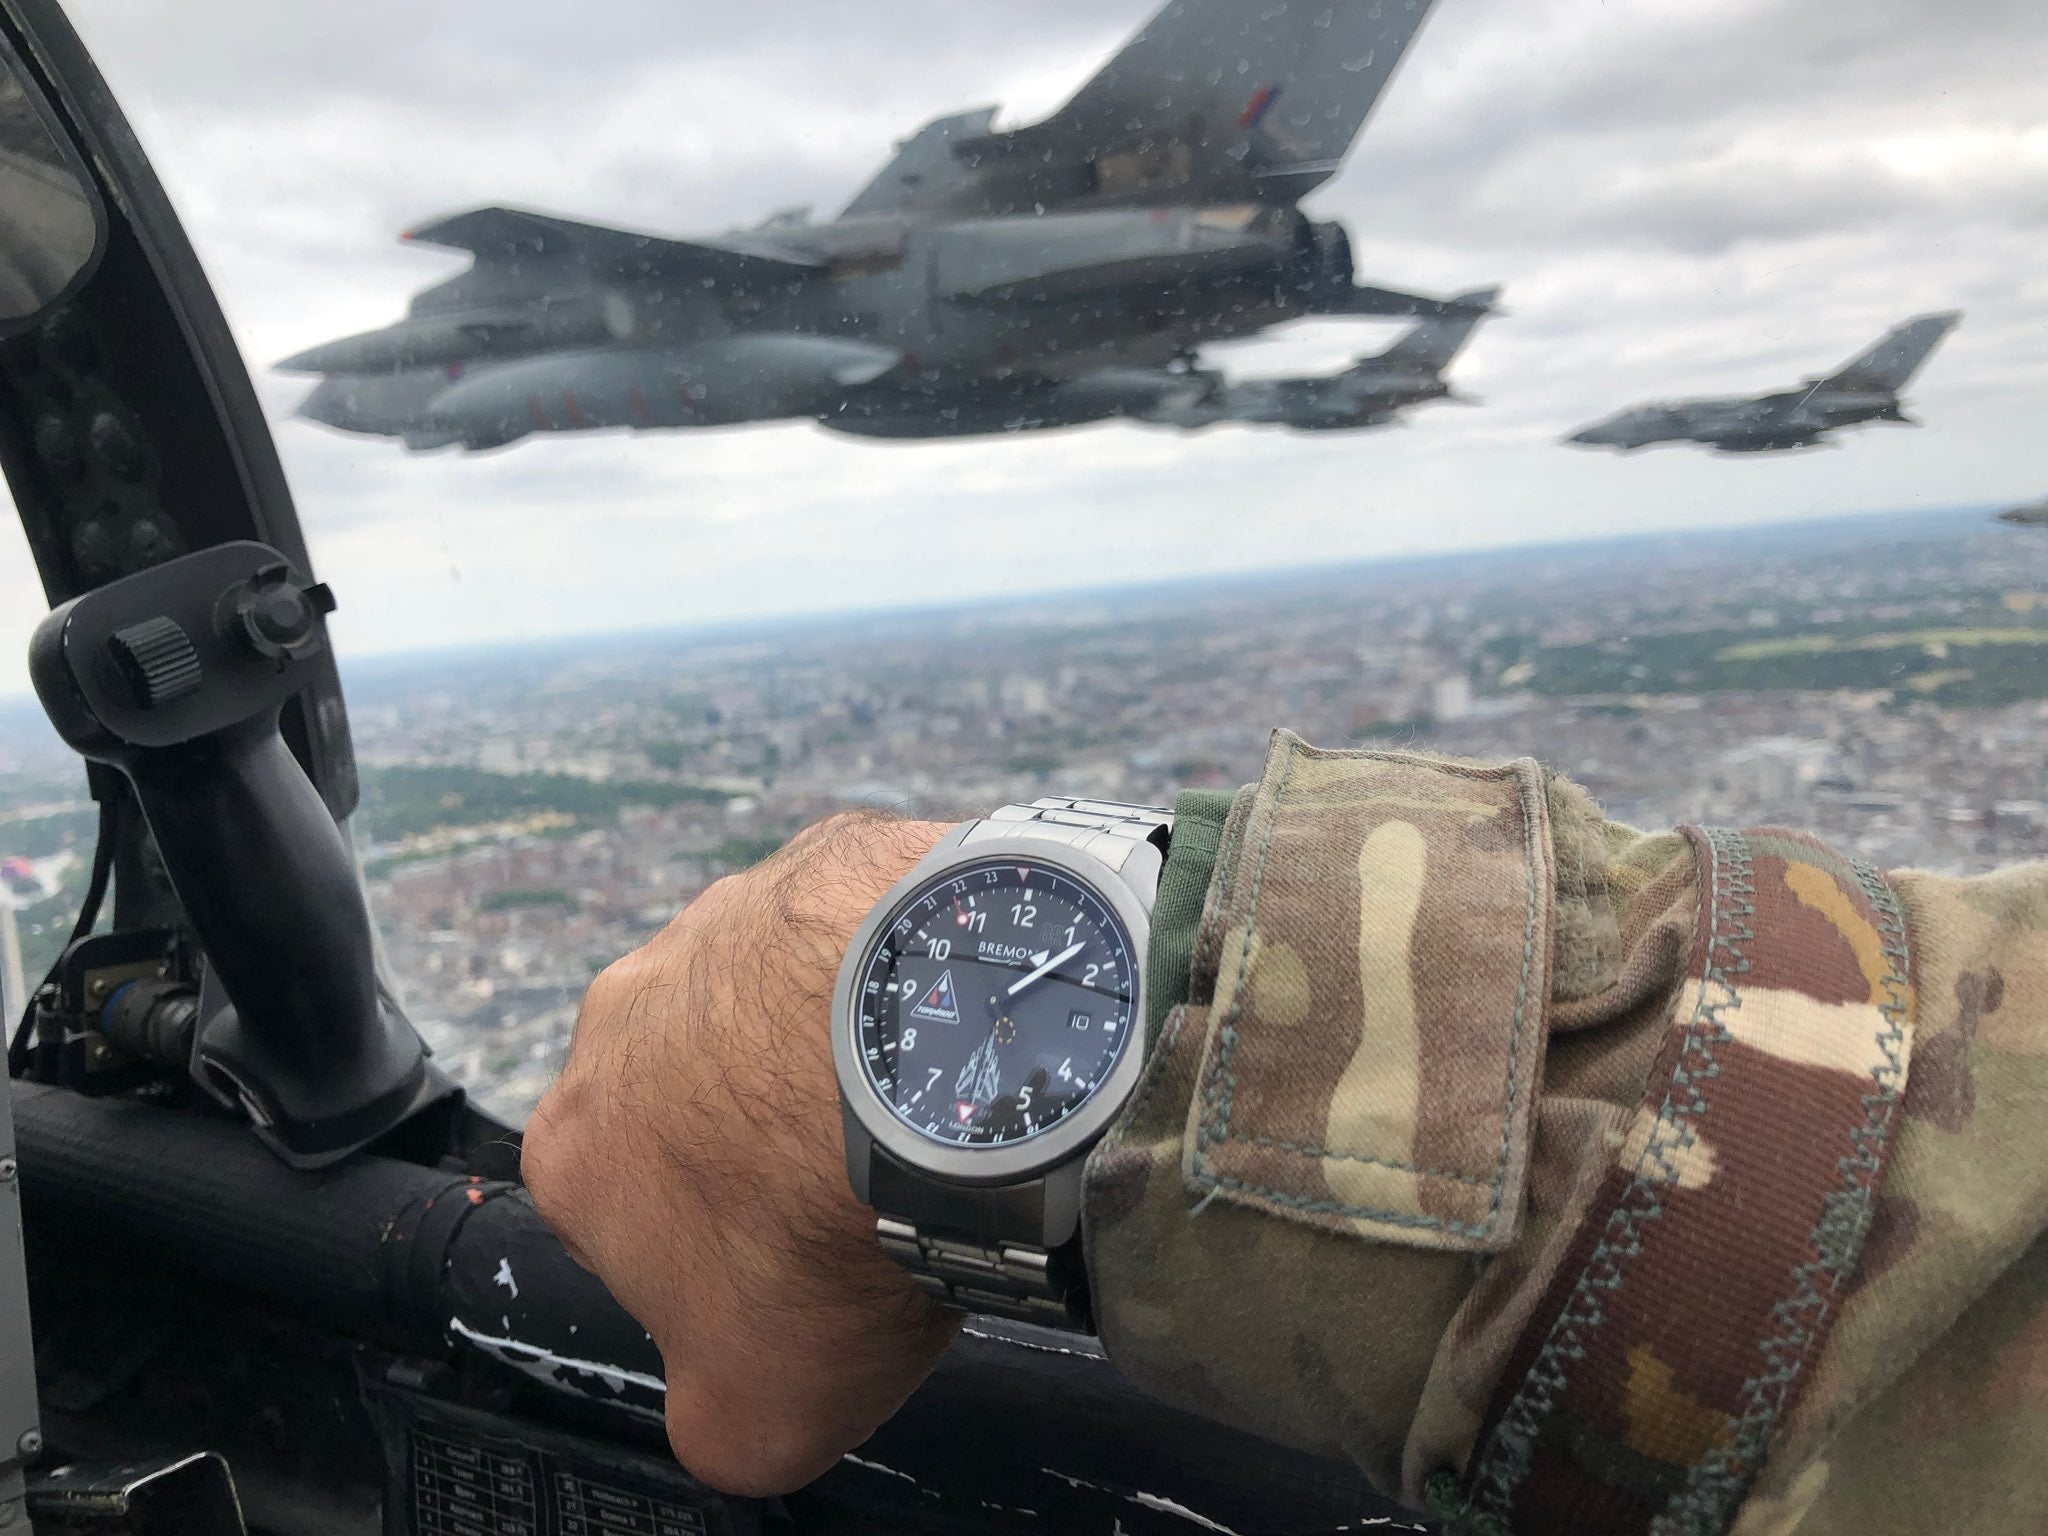 Aviation “Unit Watches”: Bremont Military and Special Projects Division